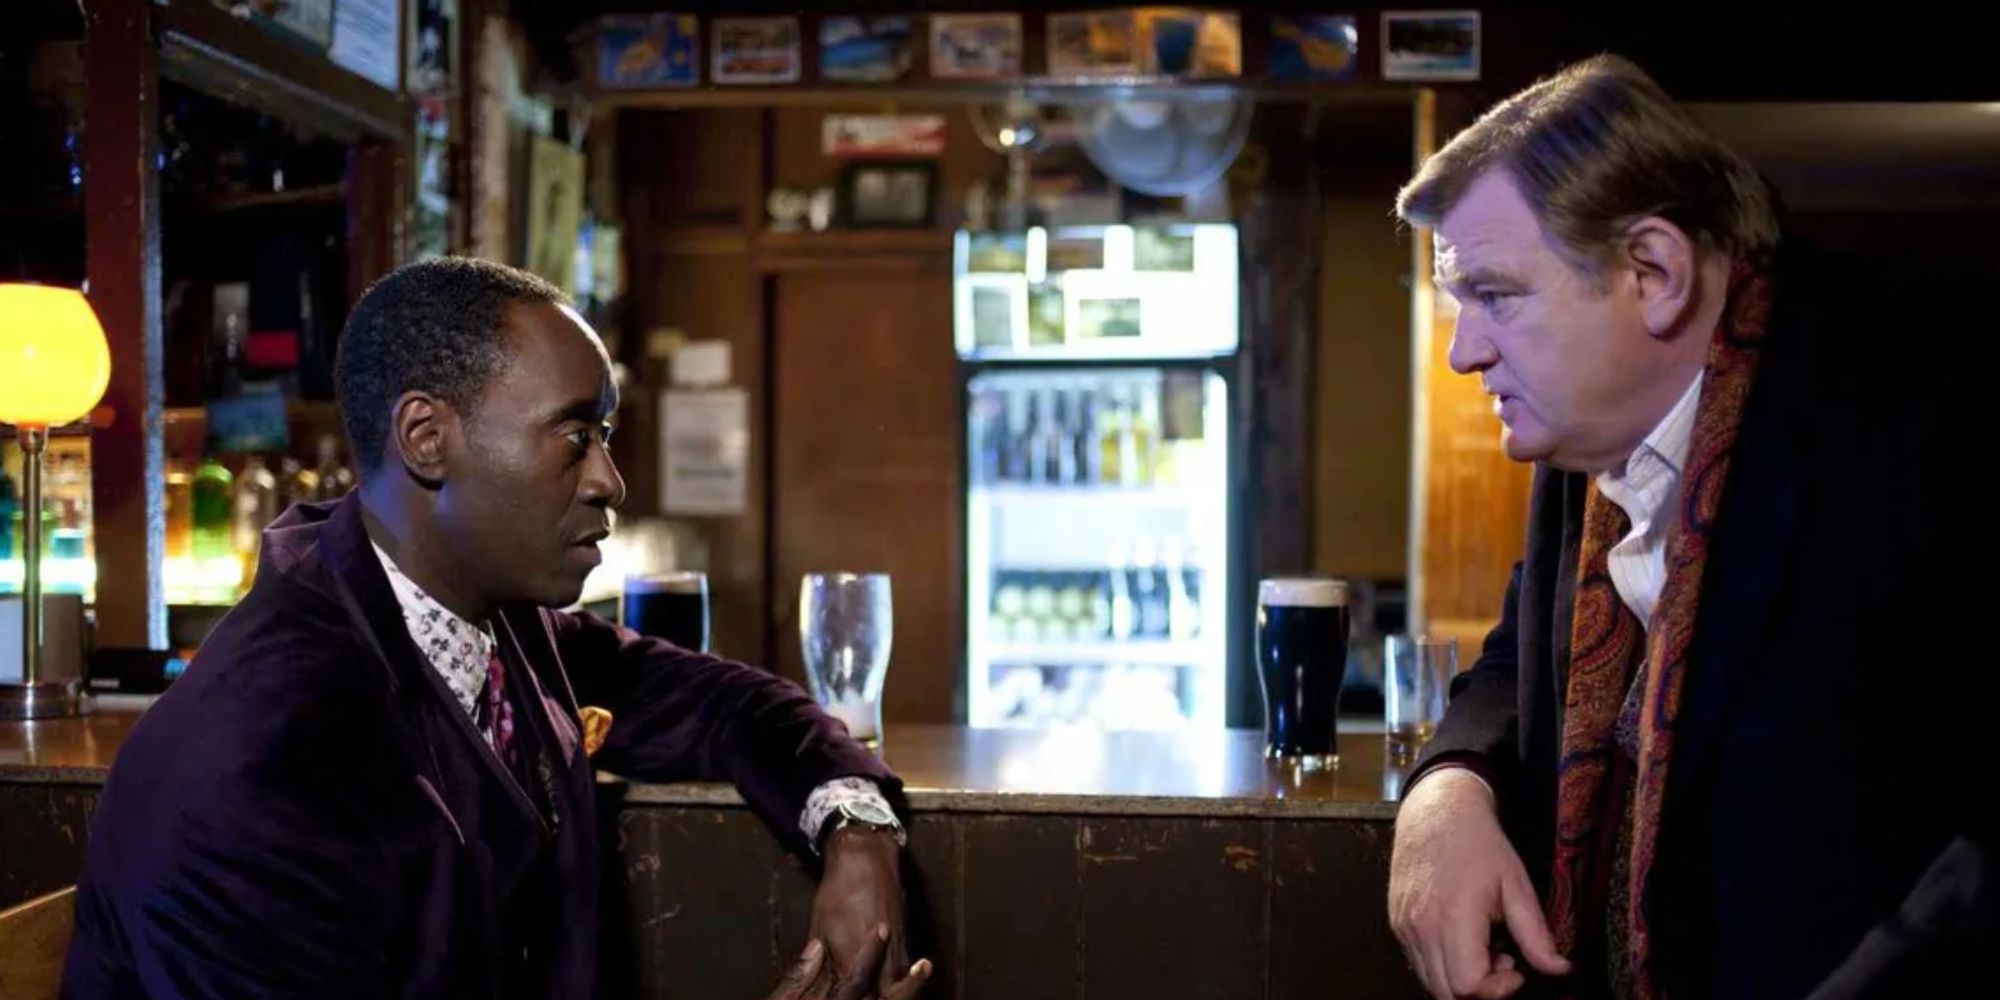 Don Cheadle and Brendan Gleeson talking at a bar in The Guard (2011)